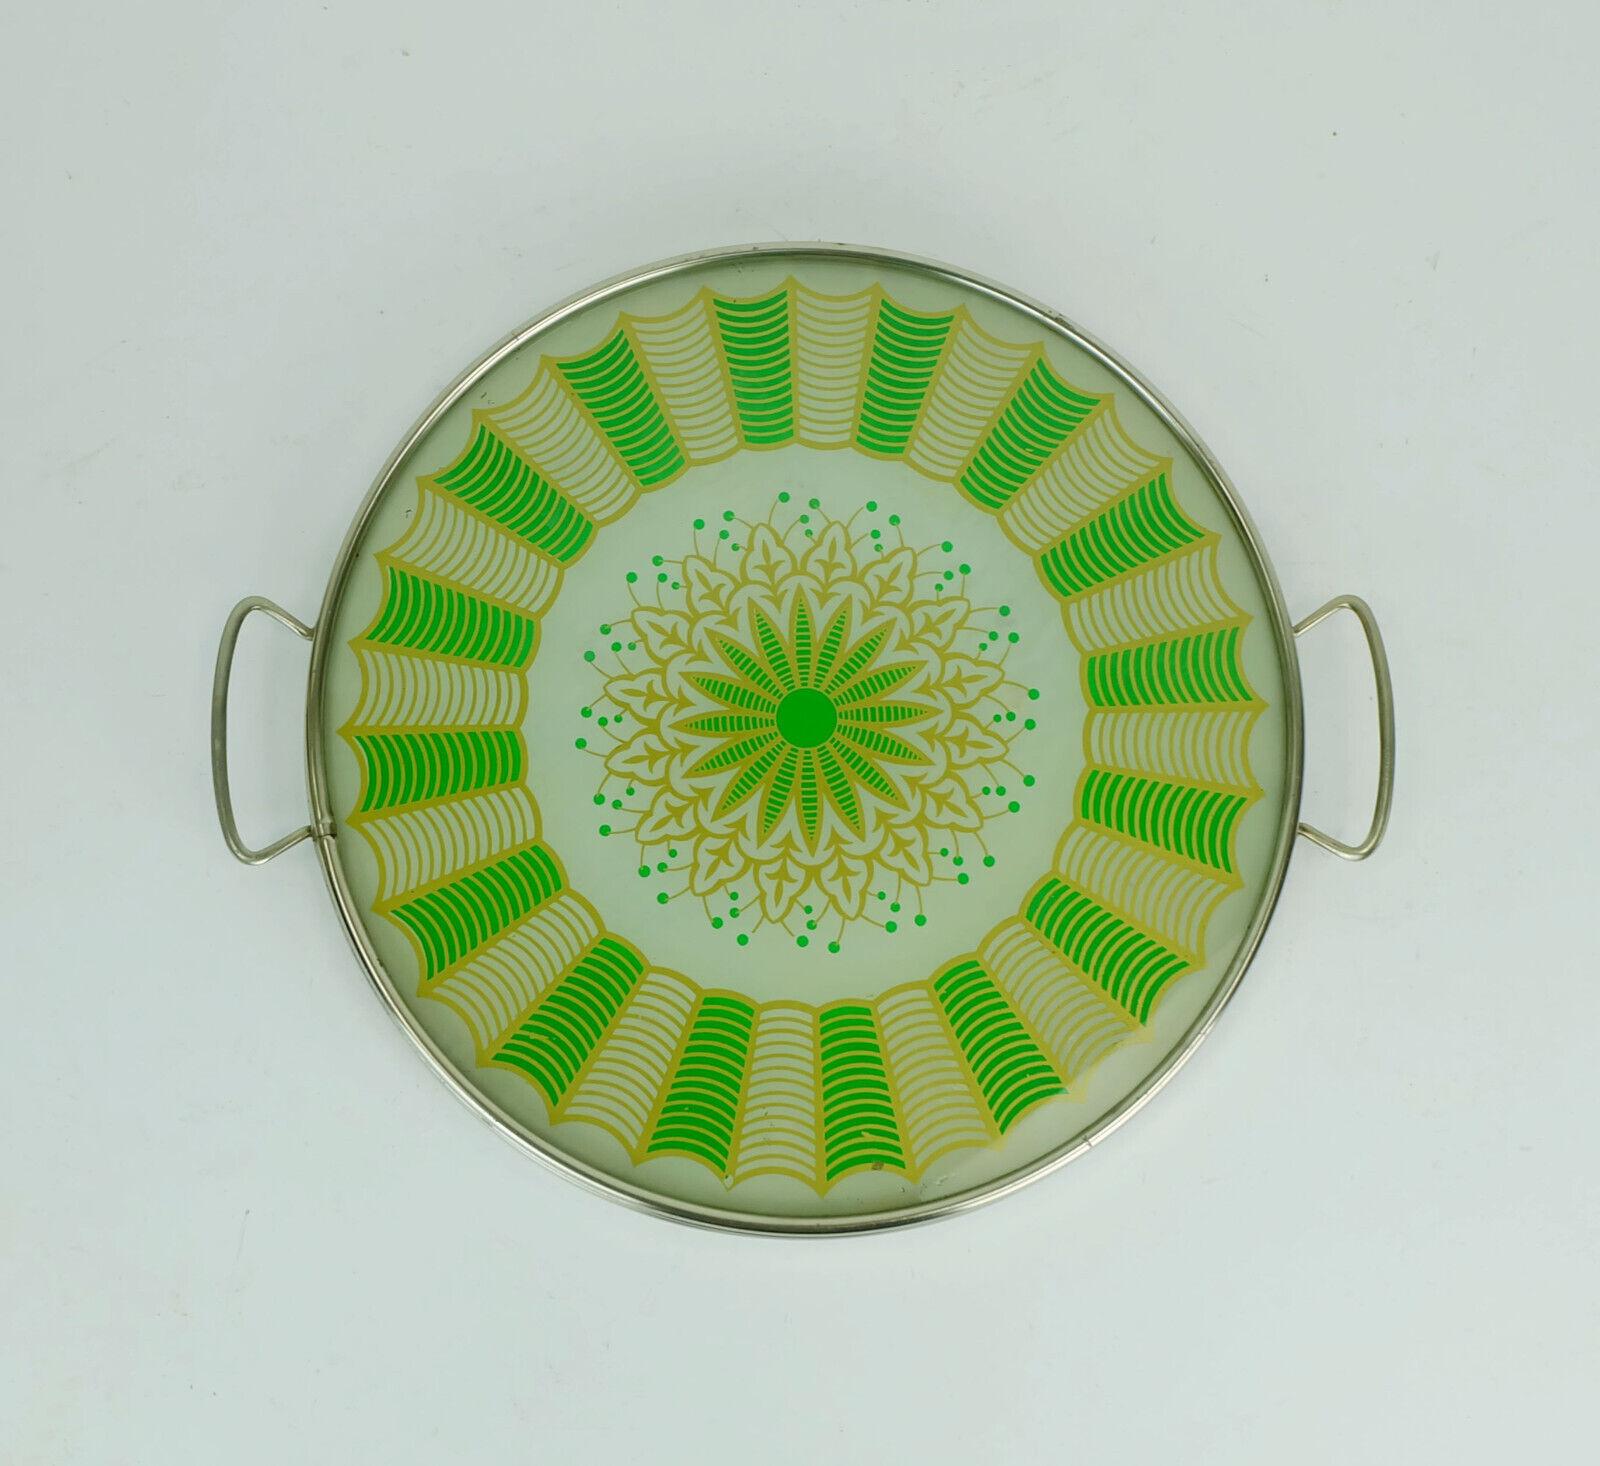 Beautiful old tray from the 1920s/30s. The base is made of glass and has an abstract reverse glass motif. The basic color of the decor is a very light pastel green, the motif itself is gold and green. The rim of the tray is made of chrome-plated